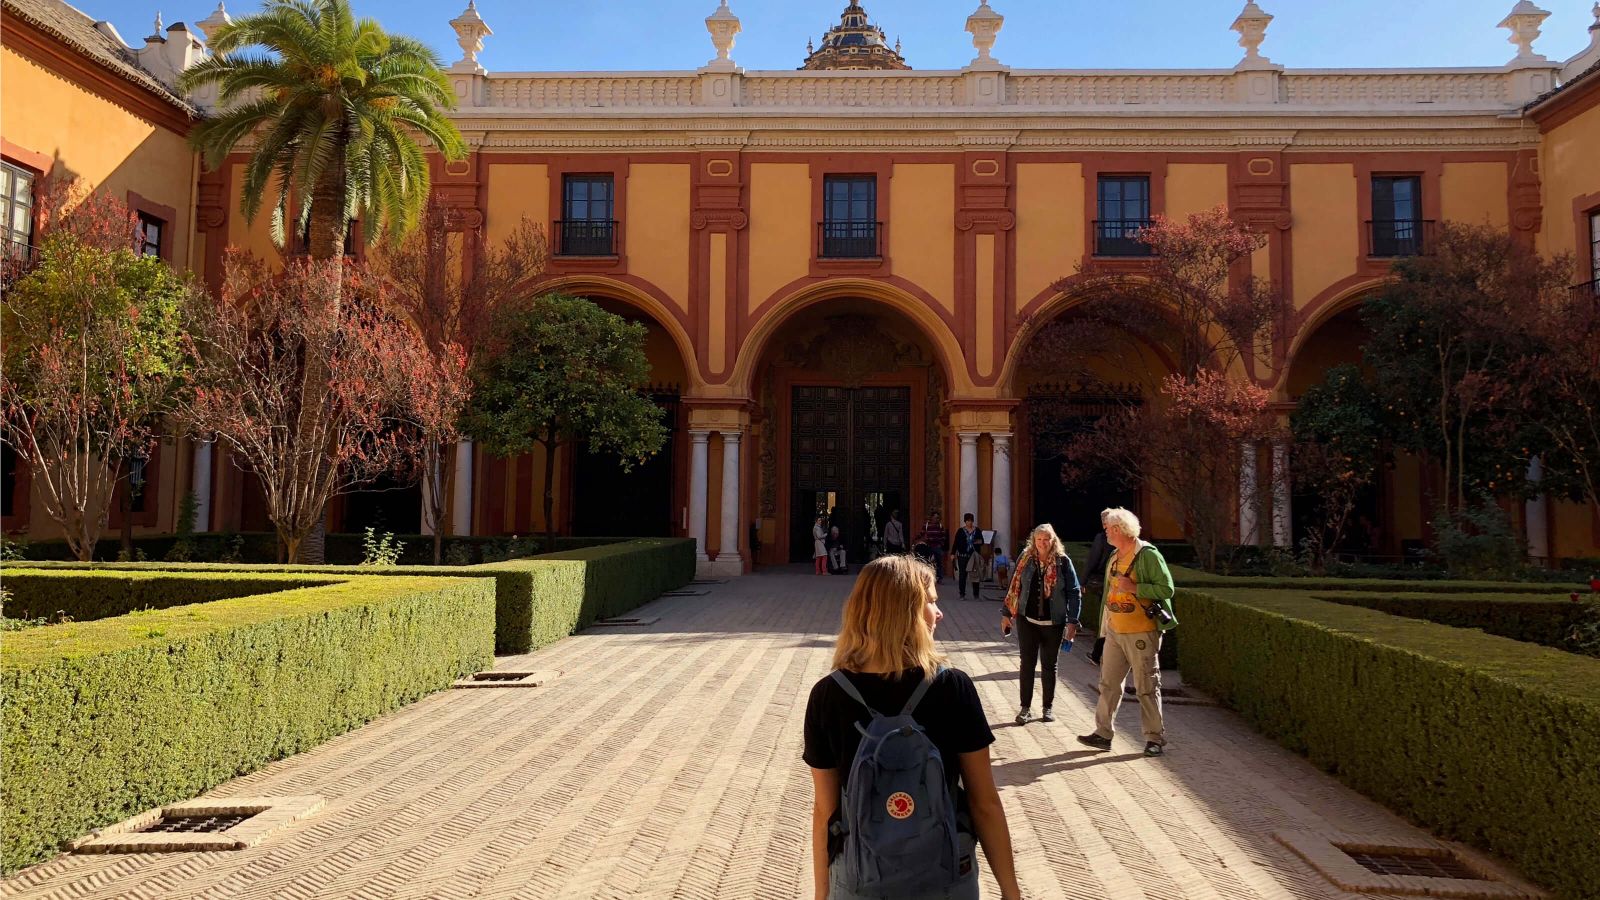 A student explores Denver Ingram at the Alcázar of Seville (the royal palace in Seville, Spain).